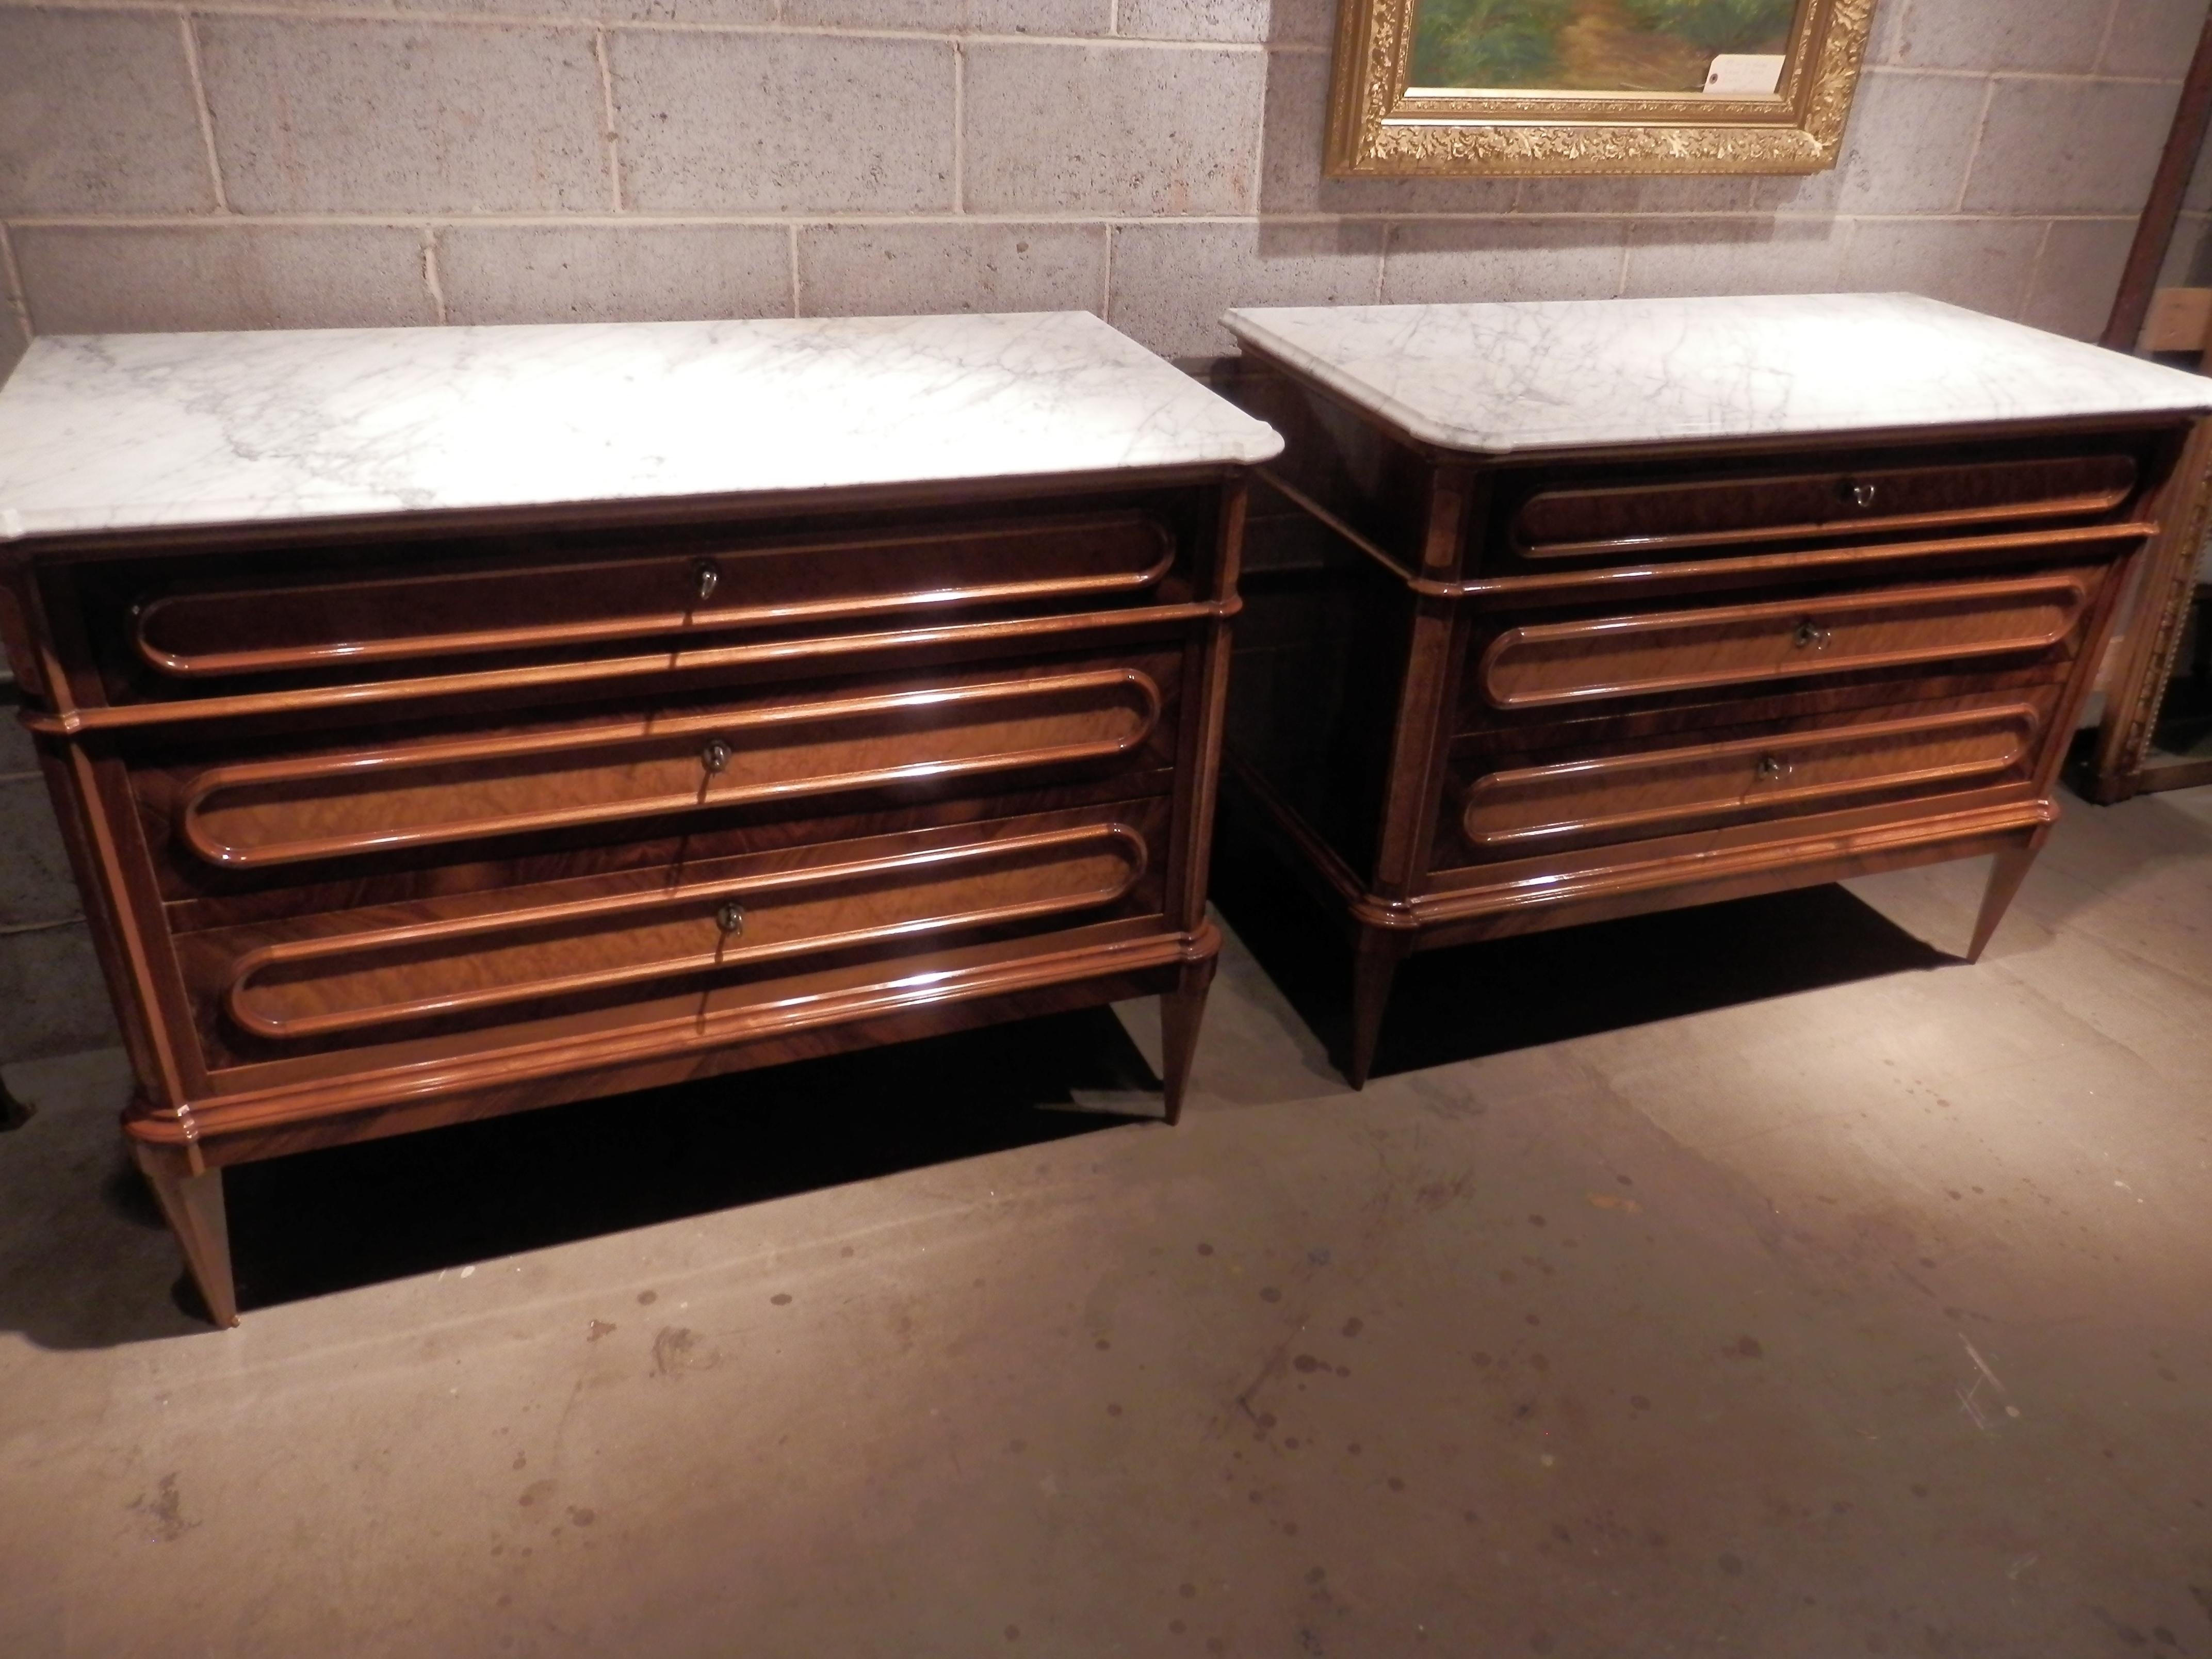 Beautiful pair of 19th century French Louis XVI walnut and fruitwood inlayed and burled commodes with the original carerra marble tops. Beautiful woods and inlay.